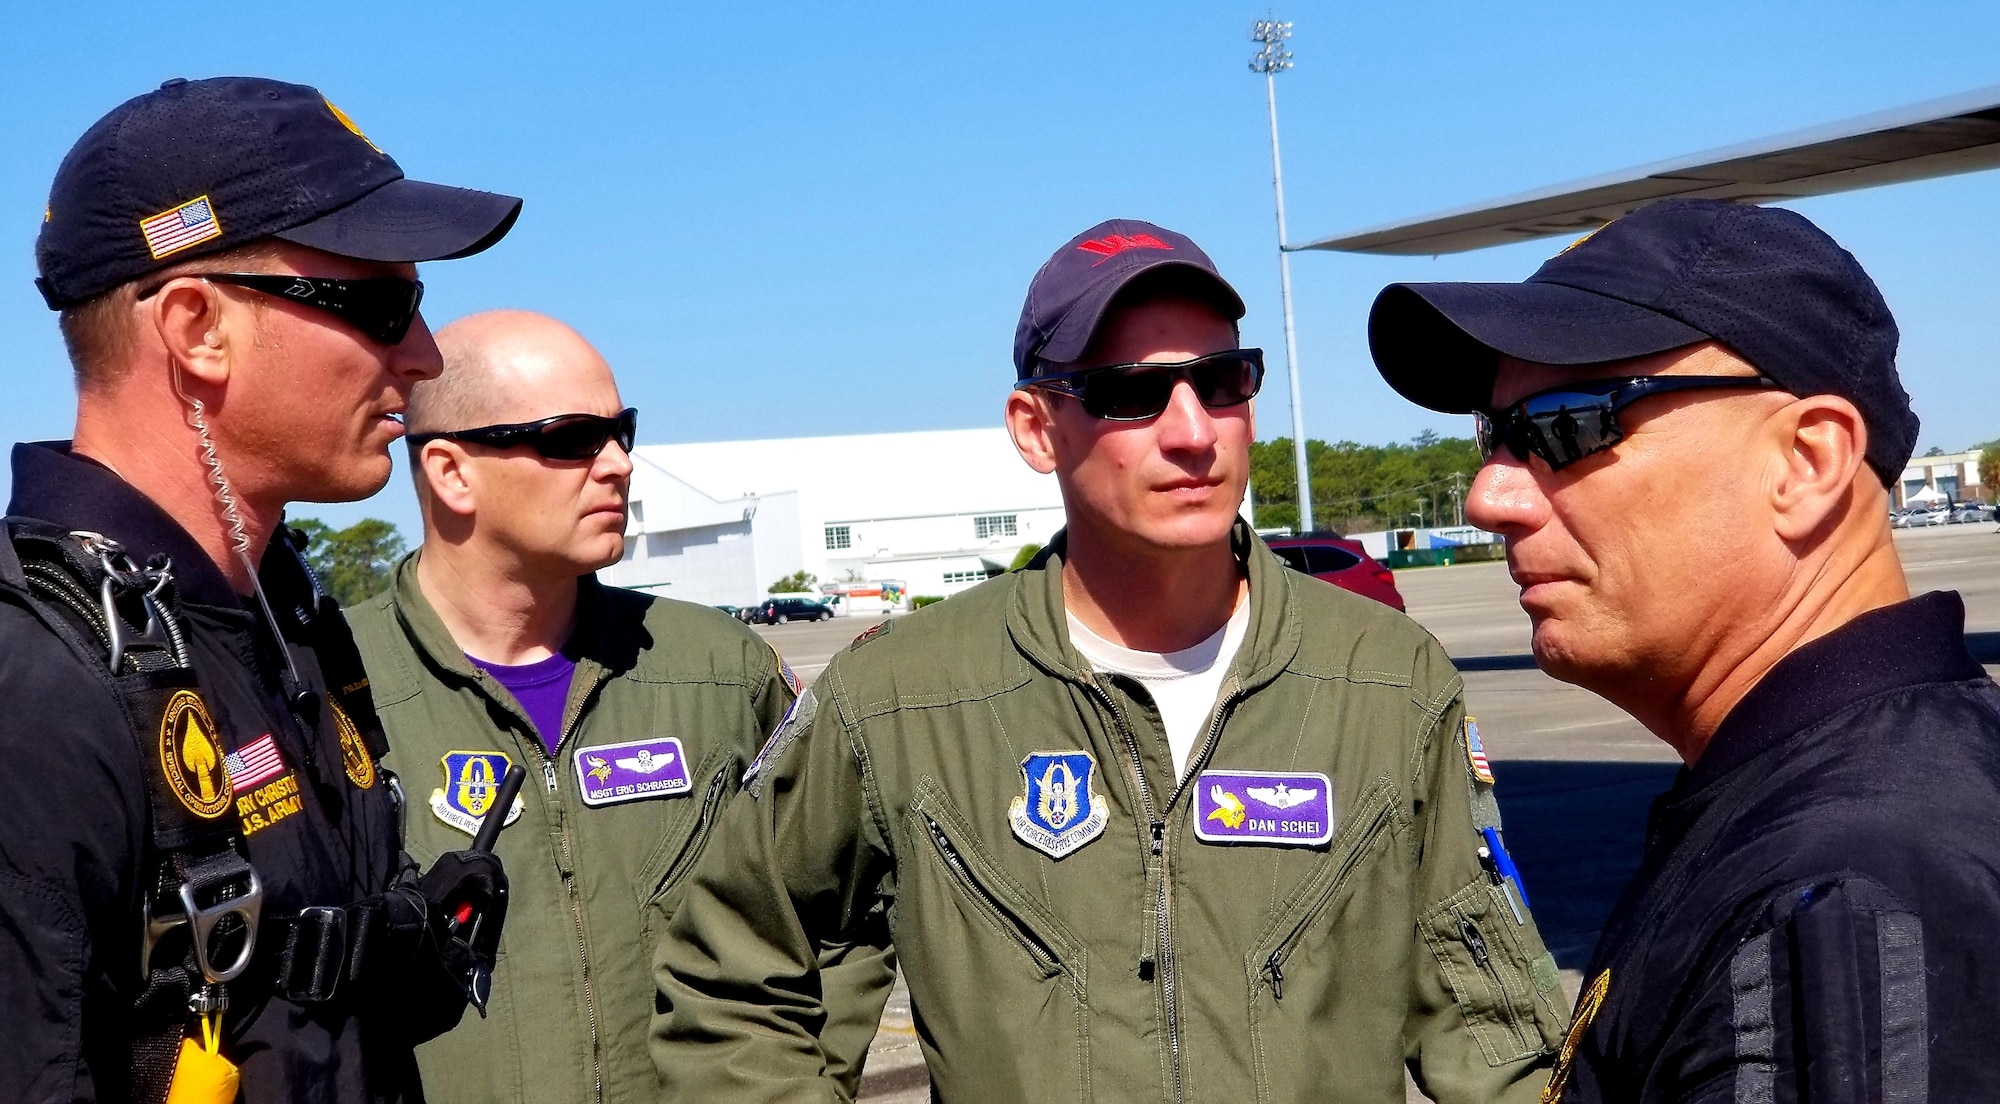 SOCOM Para-Commandos U.S. Army Sgt. 1st Class Cory Christiansen and DoD Parachute Officer Keith Walter brief the jump plan to 934th Airlift Wing loadmaster Master Sgt. Eric Schraeder and pilot Major Dan Schei before the first jump at the Wings Over Myrtle Beach Air Show April 29, 2018. The SOCOM Para-Commandos are the only joint military demonstration team in the DoD; a reserve C-130 from the 934th Airlift Wing, Minneapolis-St. Paul International Airport Air Reserve Station, provided the jump team's airlift at the show. (Air Force Photo/Lt. Col Erin Karl)